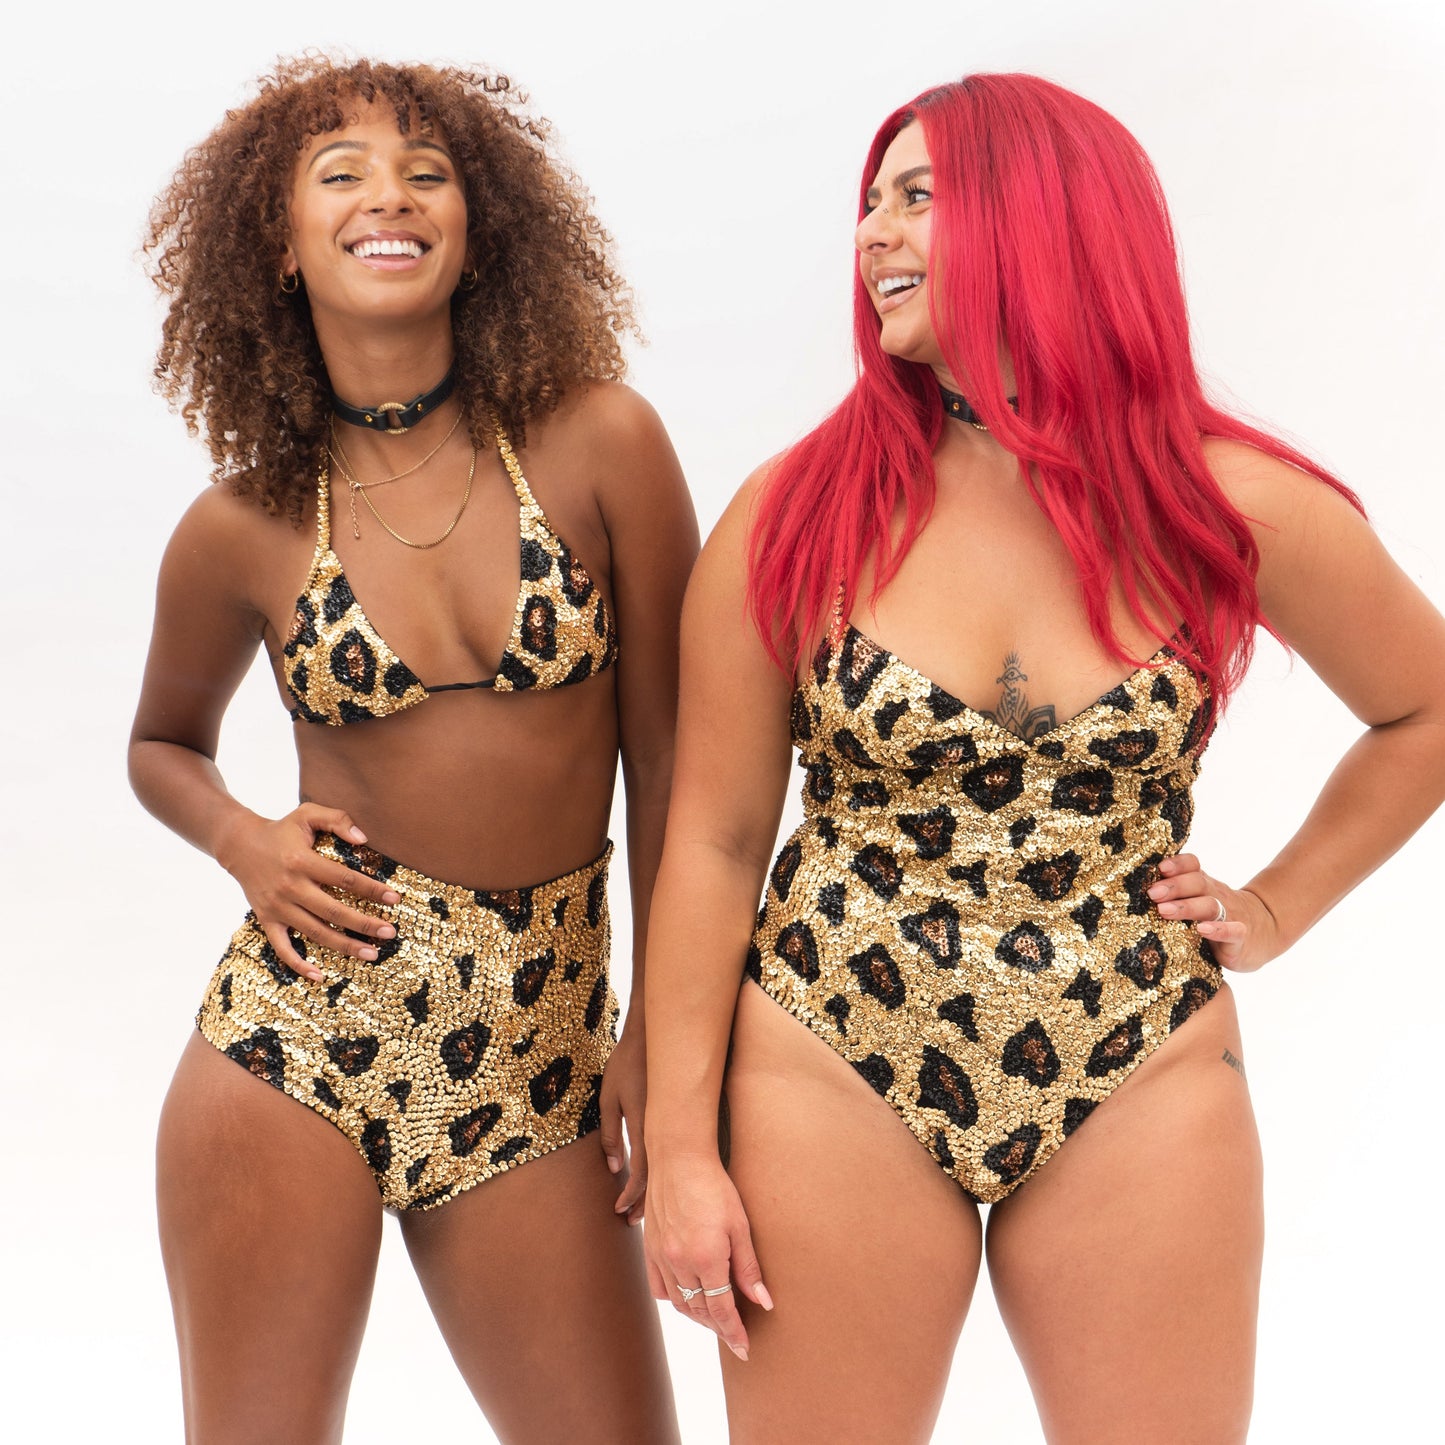 matching festival sets and bodysuit in gold leopard print design for festival outfit and burning man fashion  